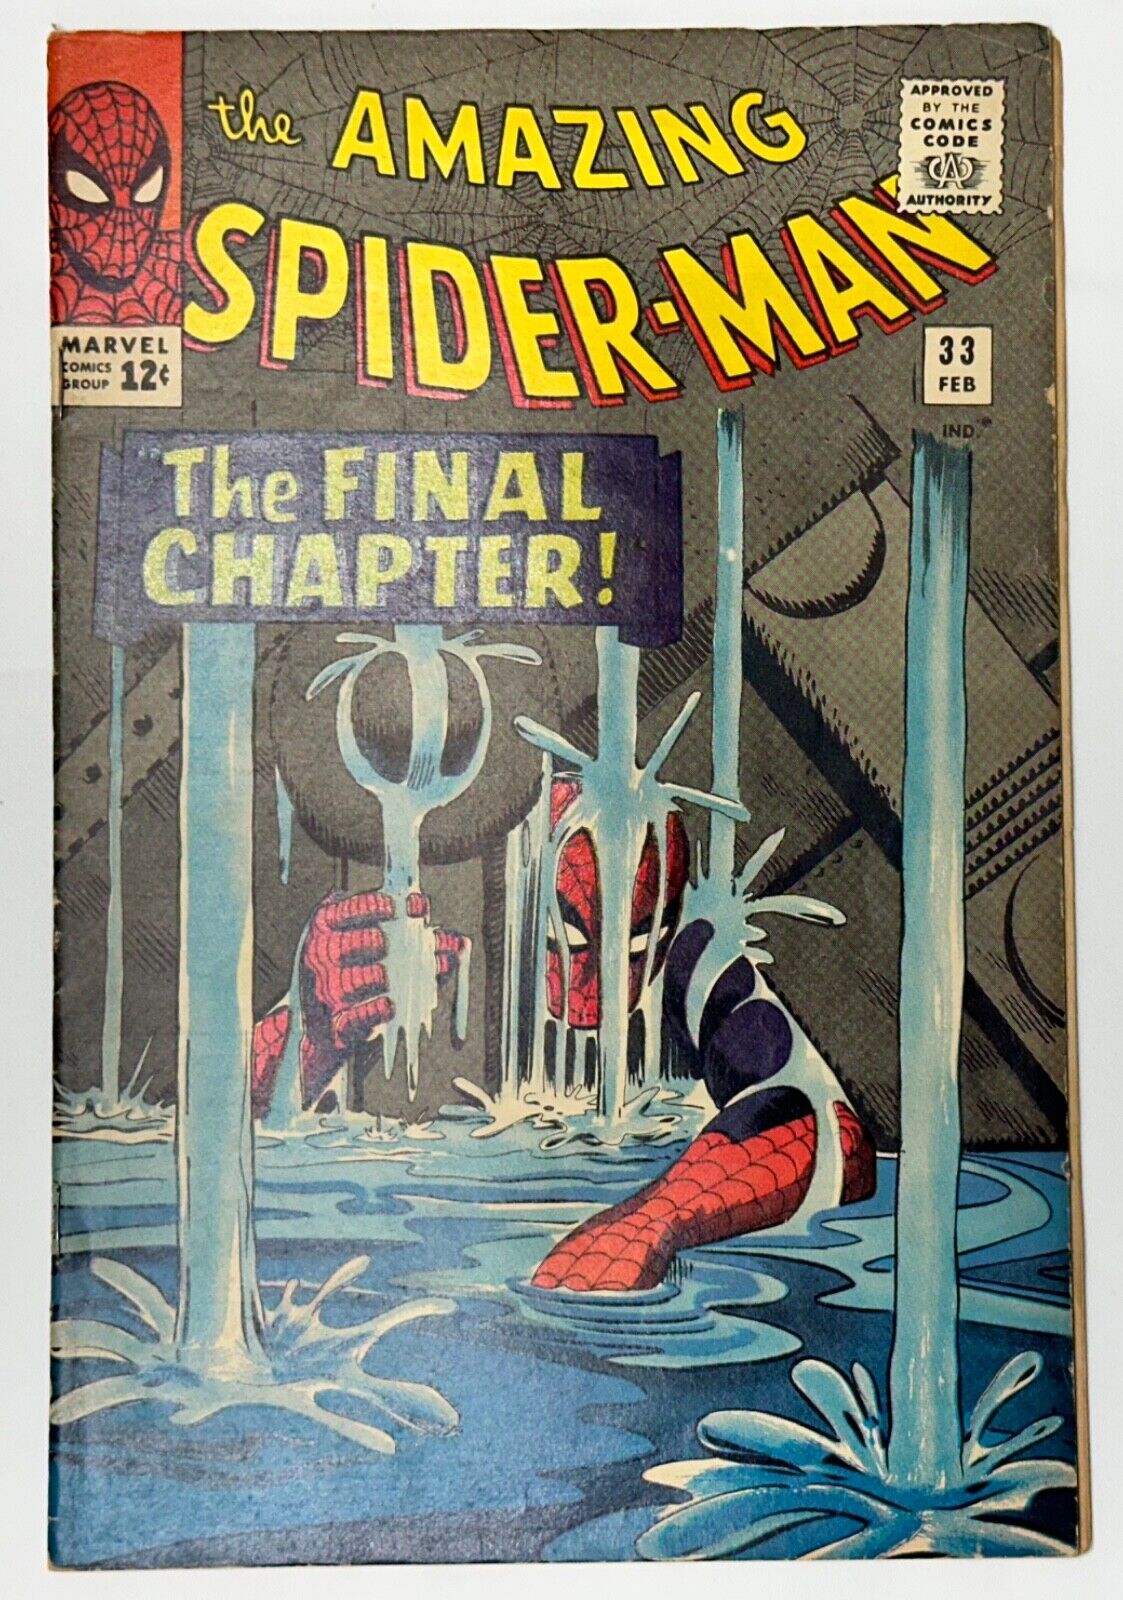 AMAZING SPIDER-MAN #33 VG+ 1966 App of Dr. Curt Connors 1966 Marvel Comics